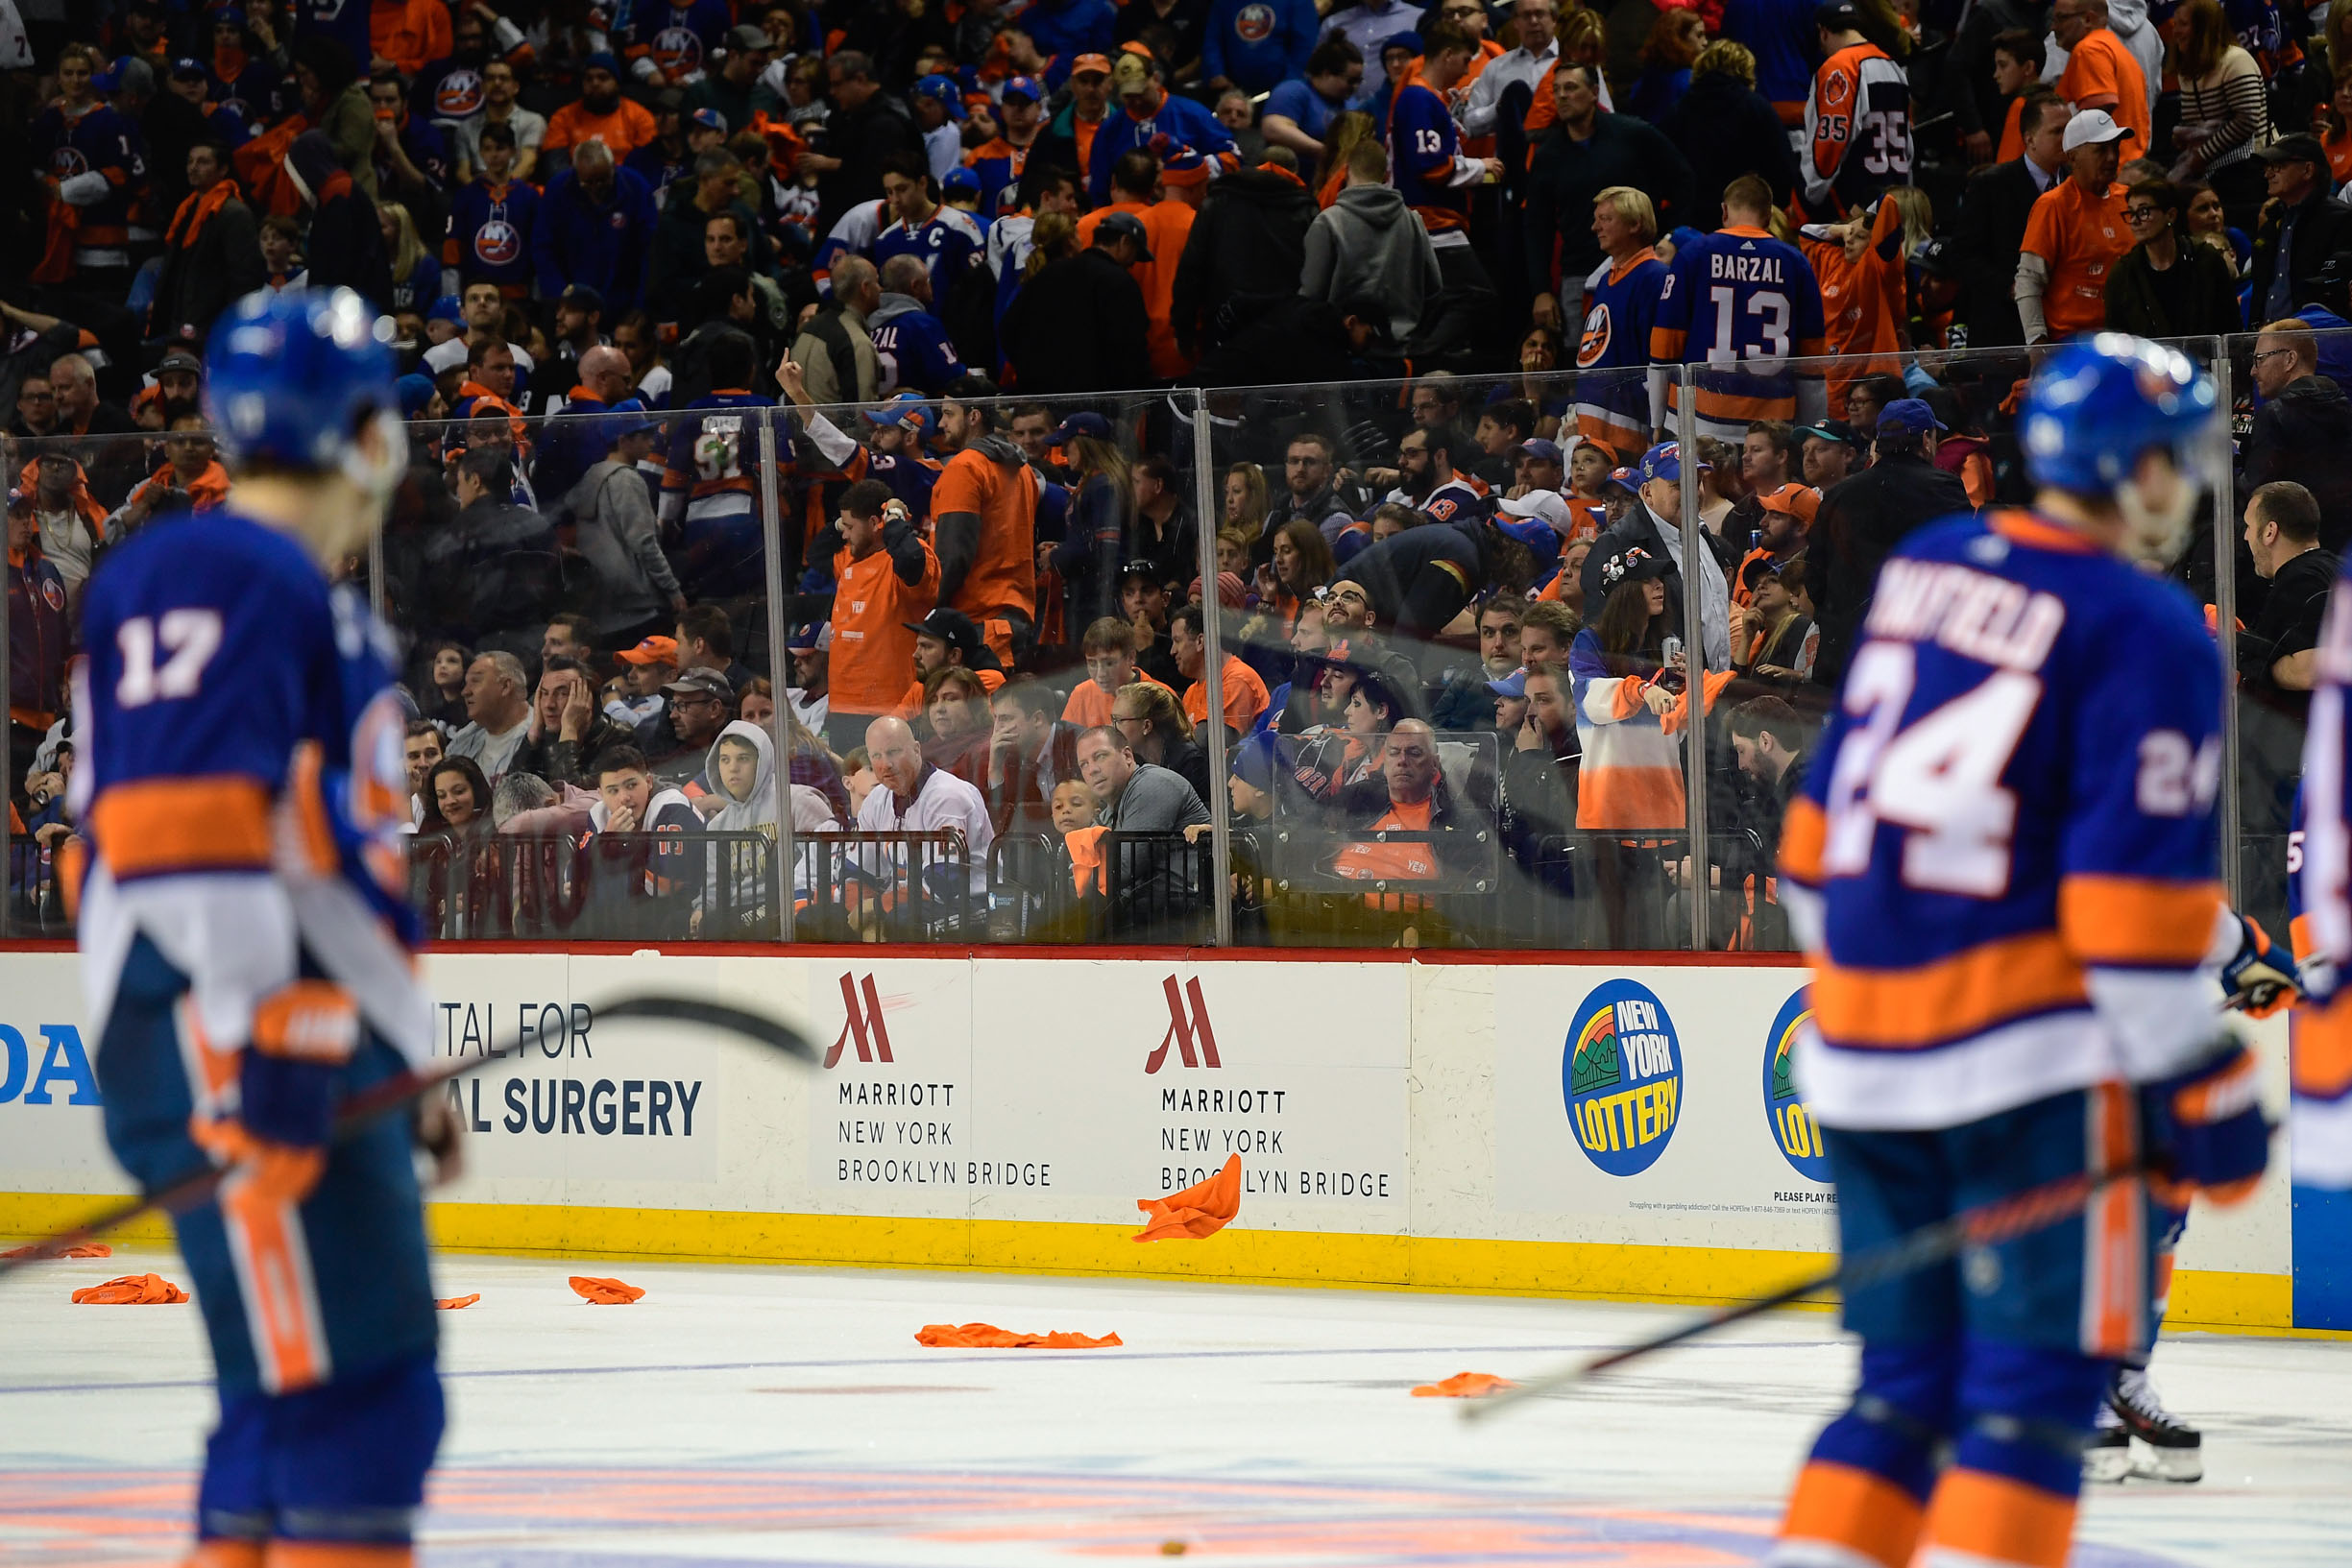 Apr 26, 2019; Brooklyn, NY, USA; Fans throw rally shirts onto the ice after the New York Islanders lose 0-1 to the Carolina Hurricanes in overtime in game one of the second round of the 2019 Stanley Cup Playoffs at Barclays Center. Mandatory Credit: Catalina Fragoso-USA TODAY Sports